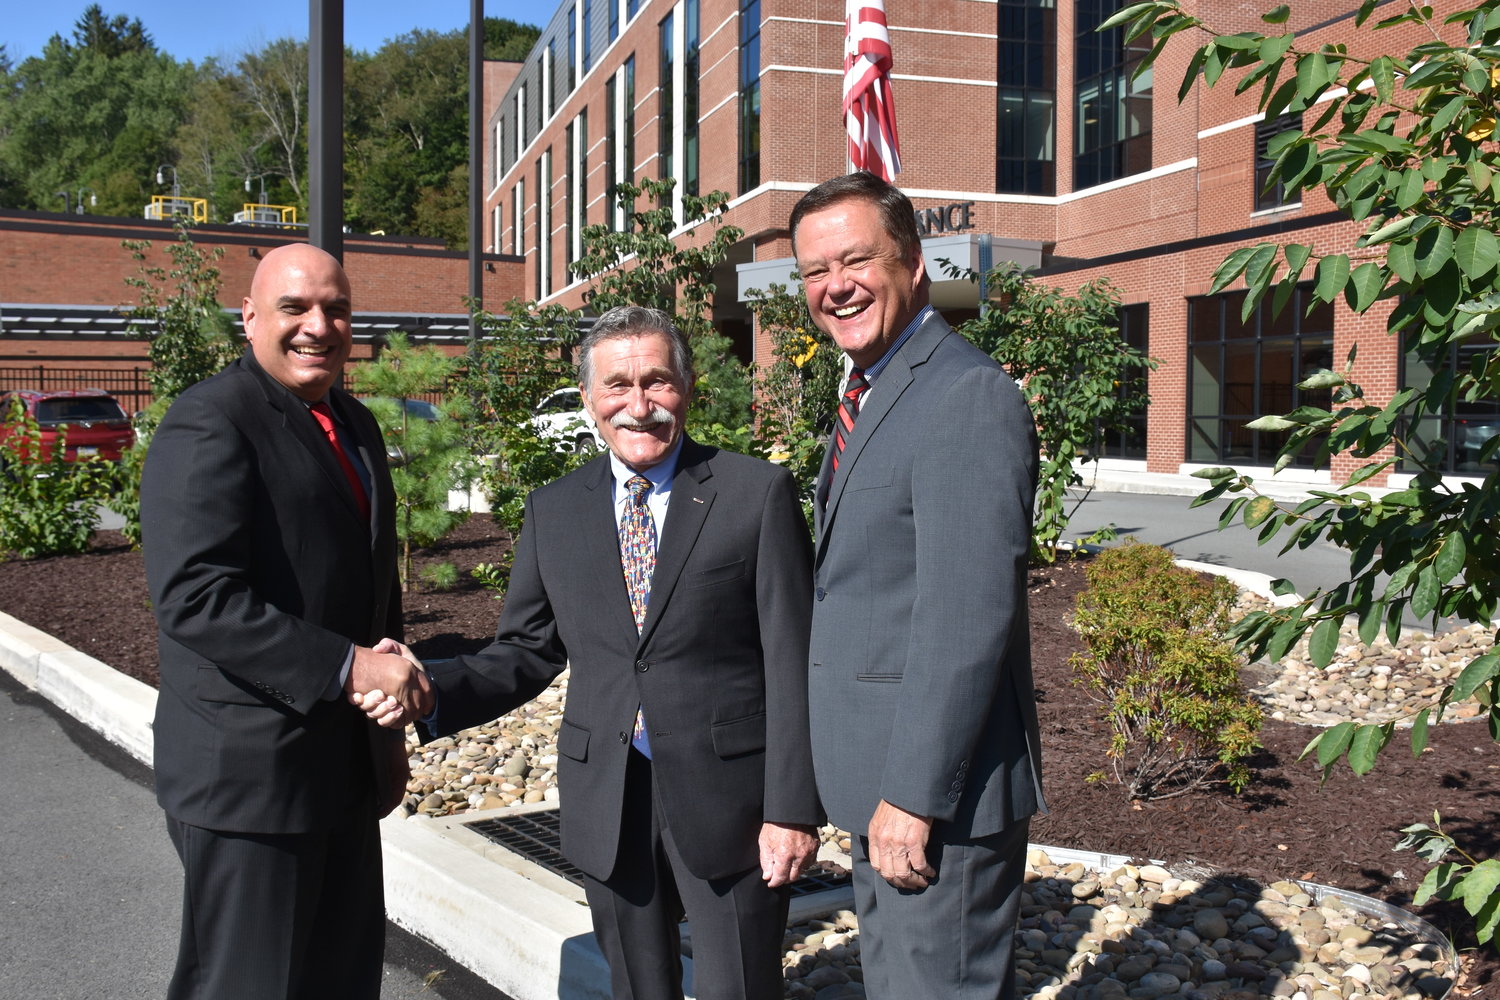 James Pettinato, left, has been chosen as the new chief executive officer at the Wayne Memorial Health System. He is congratulated by Board Chairperson Hugh Rechner, center. Pettinato will succeed David L. Hoff, right. The flag behind them is at half-staff in honor of the 13 service members and others killed recently in Afghanistan.